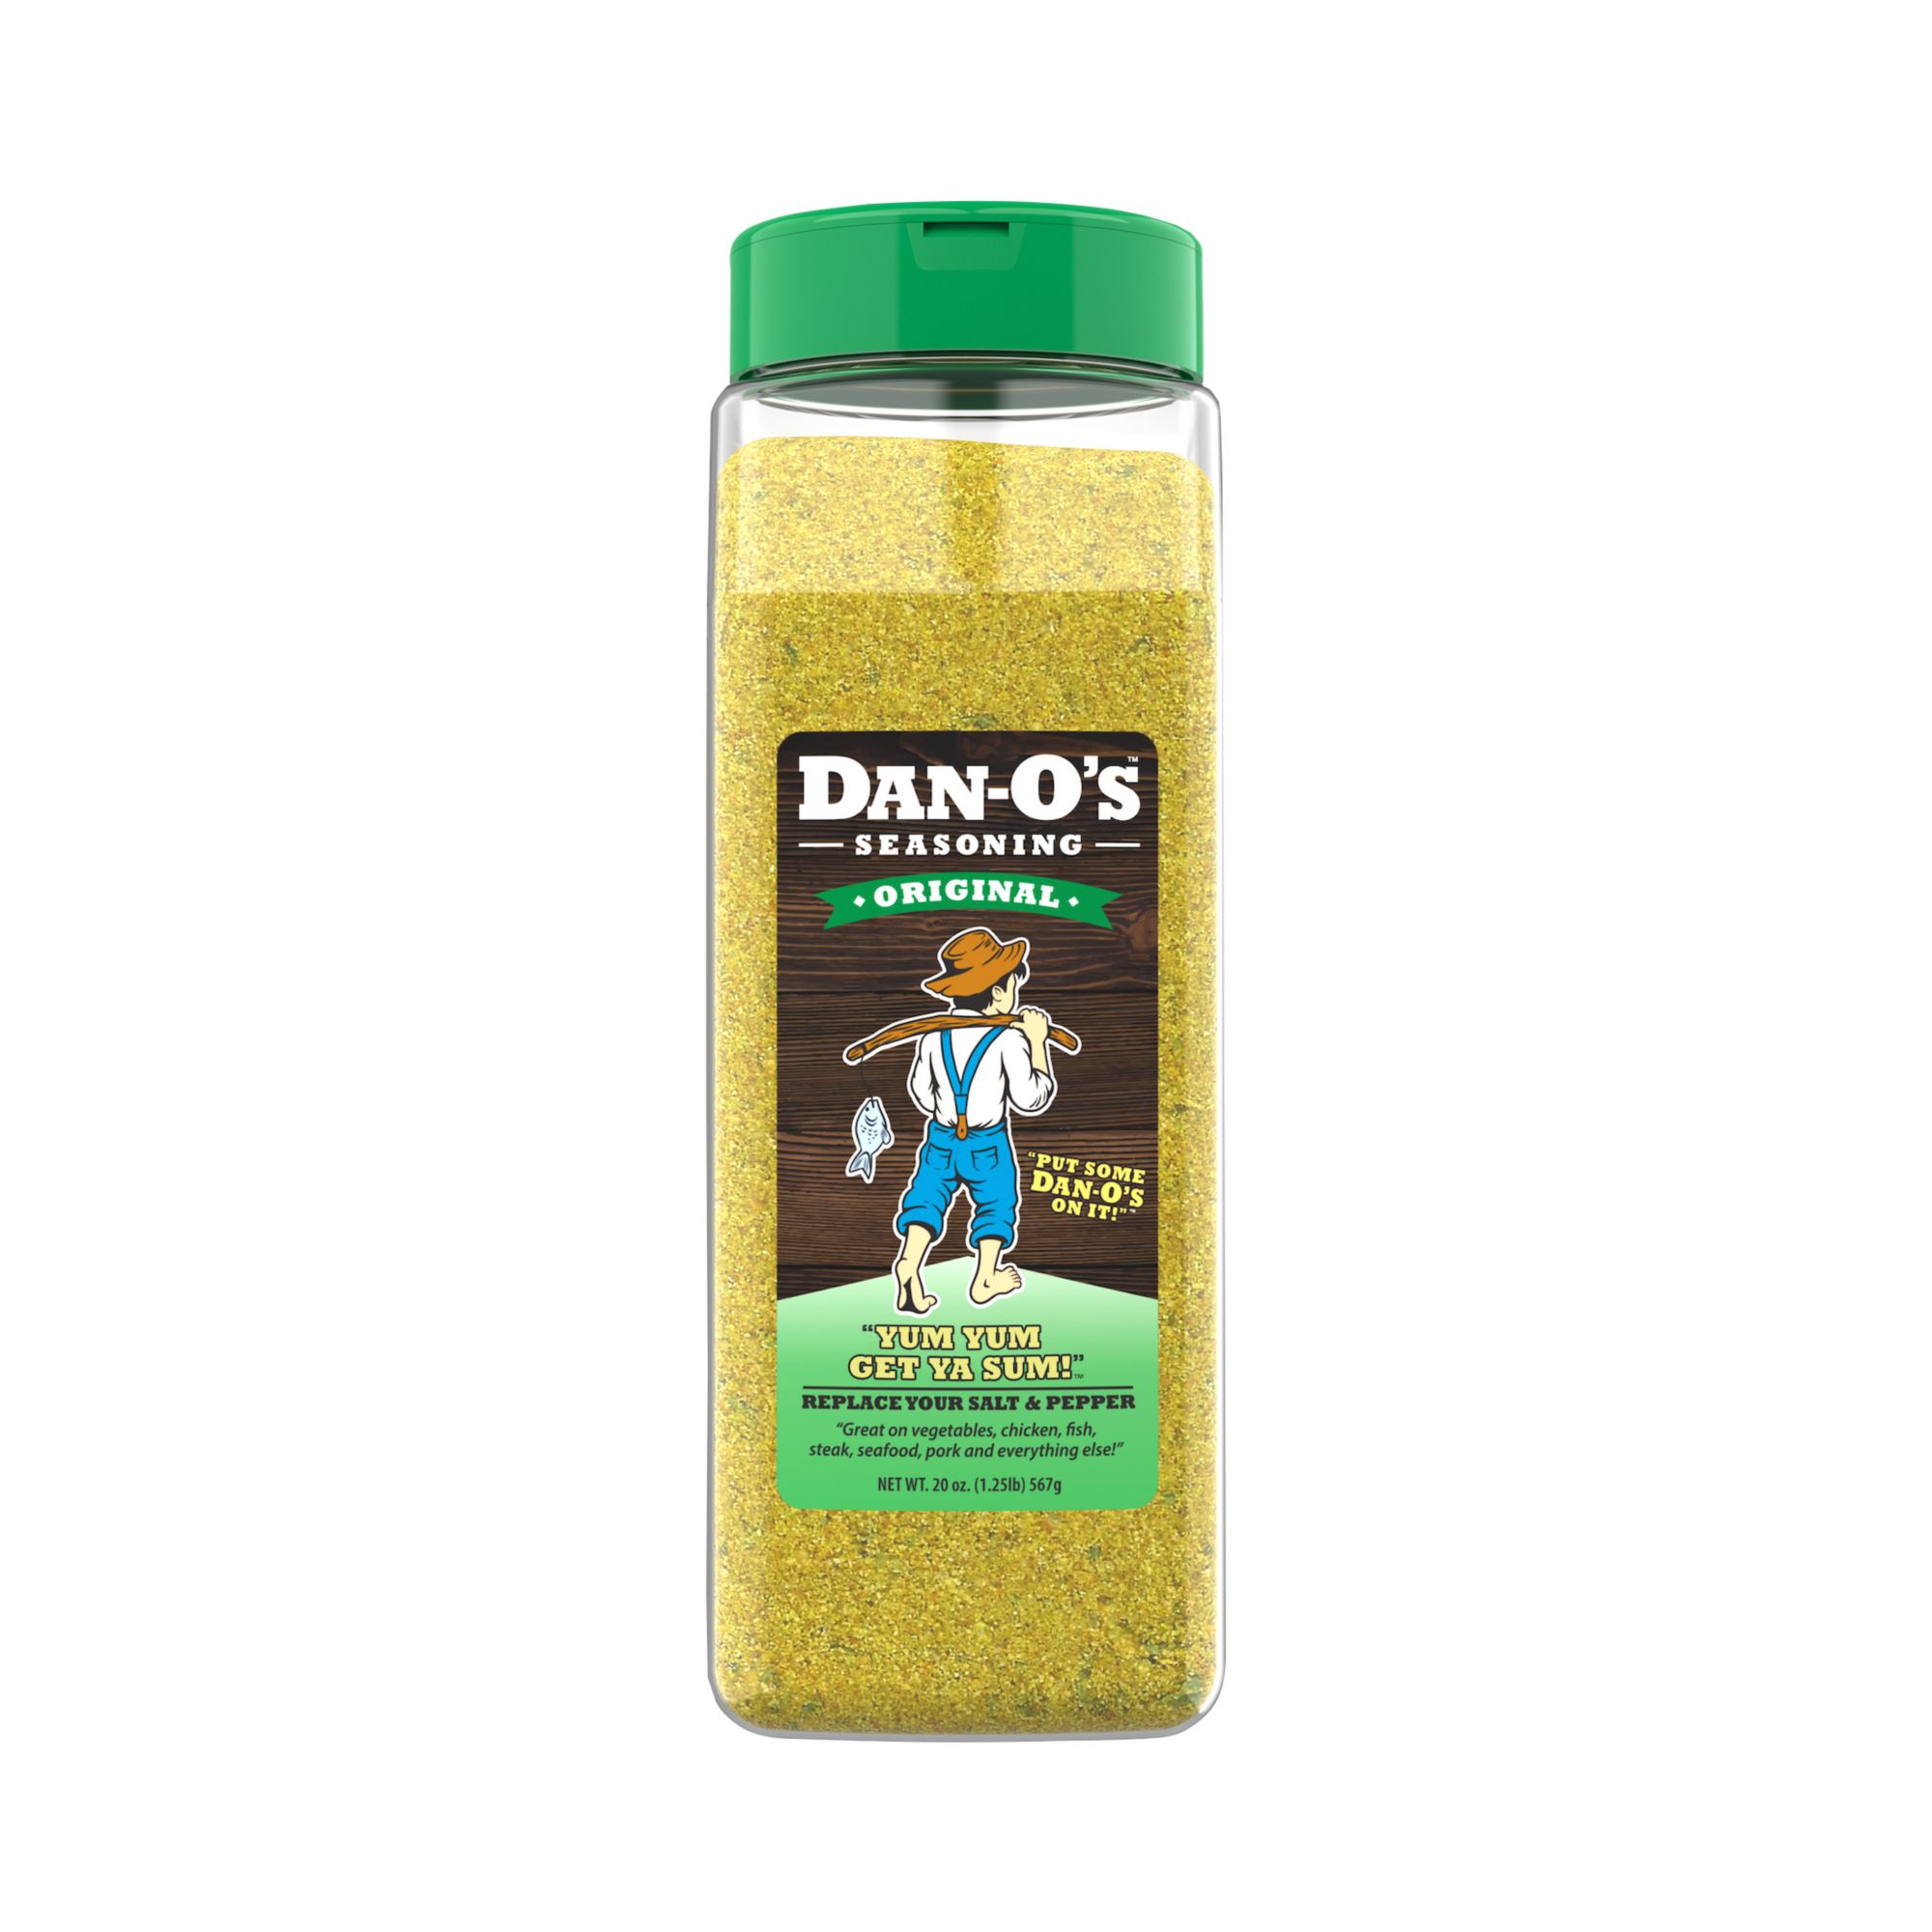 Pepper-Like Seasoning 8.5 oz CLEARANCE - Expired or about to